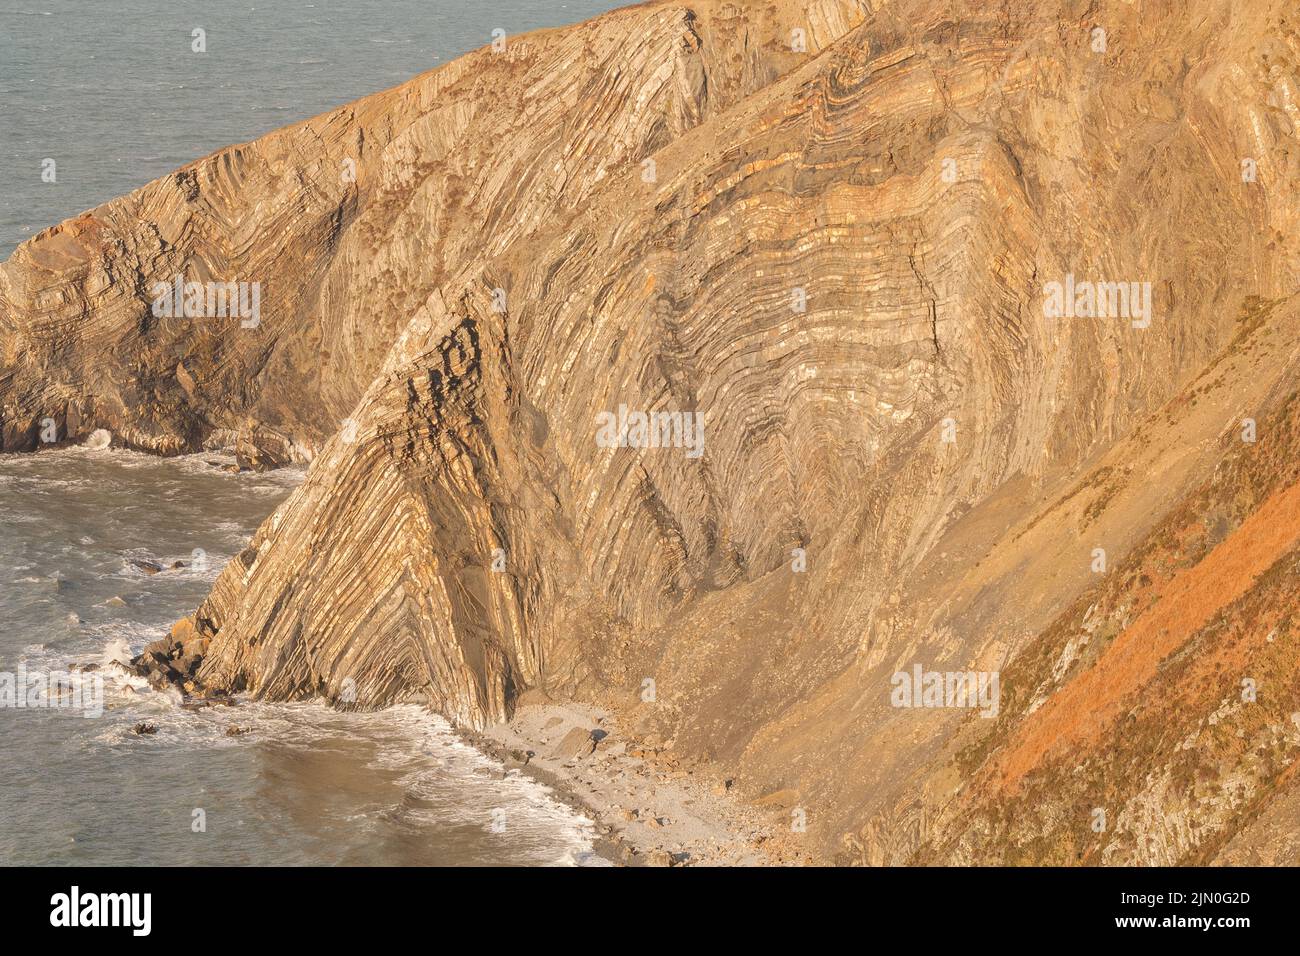 Angular anticlinal fold Traeth Godi'r Coch Cemaes Head Pembrokeshire Wales UK Europe.  Atlantic Grey Seals can be seen hauled out on the rocky beach. Stock Photo